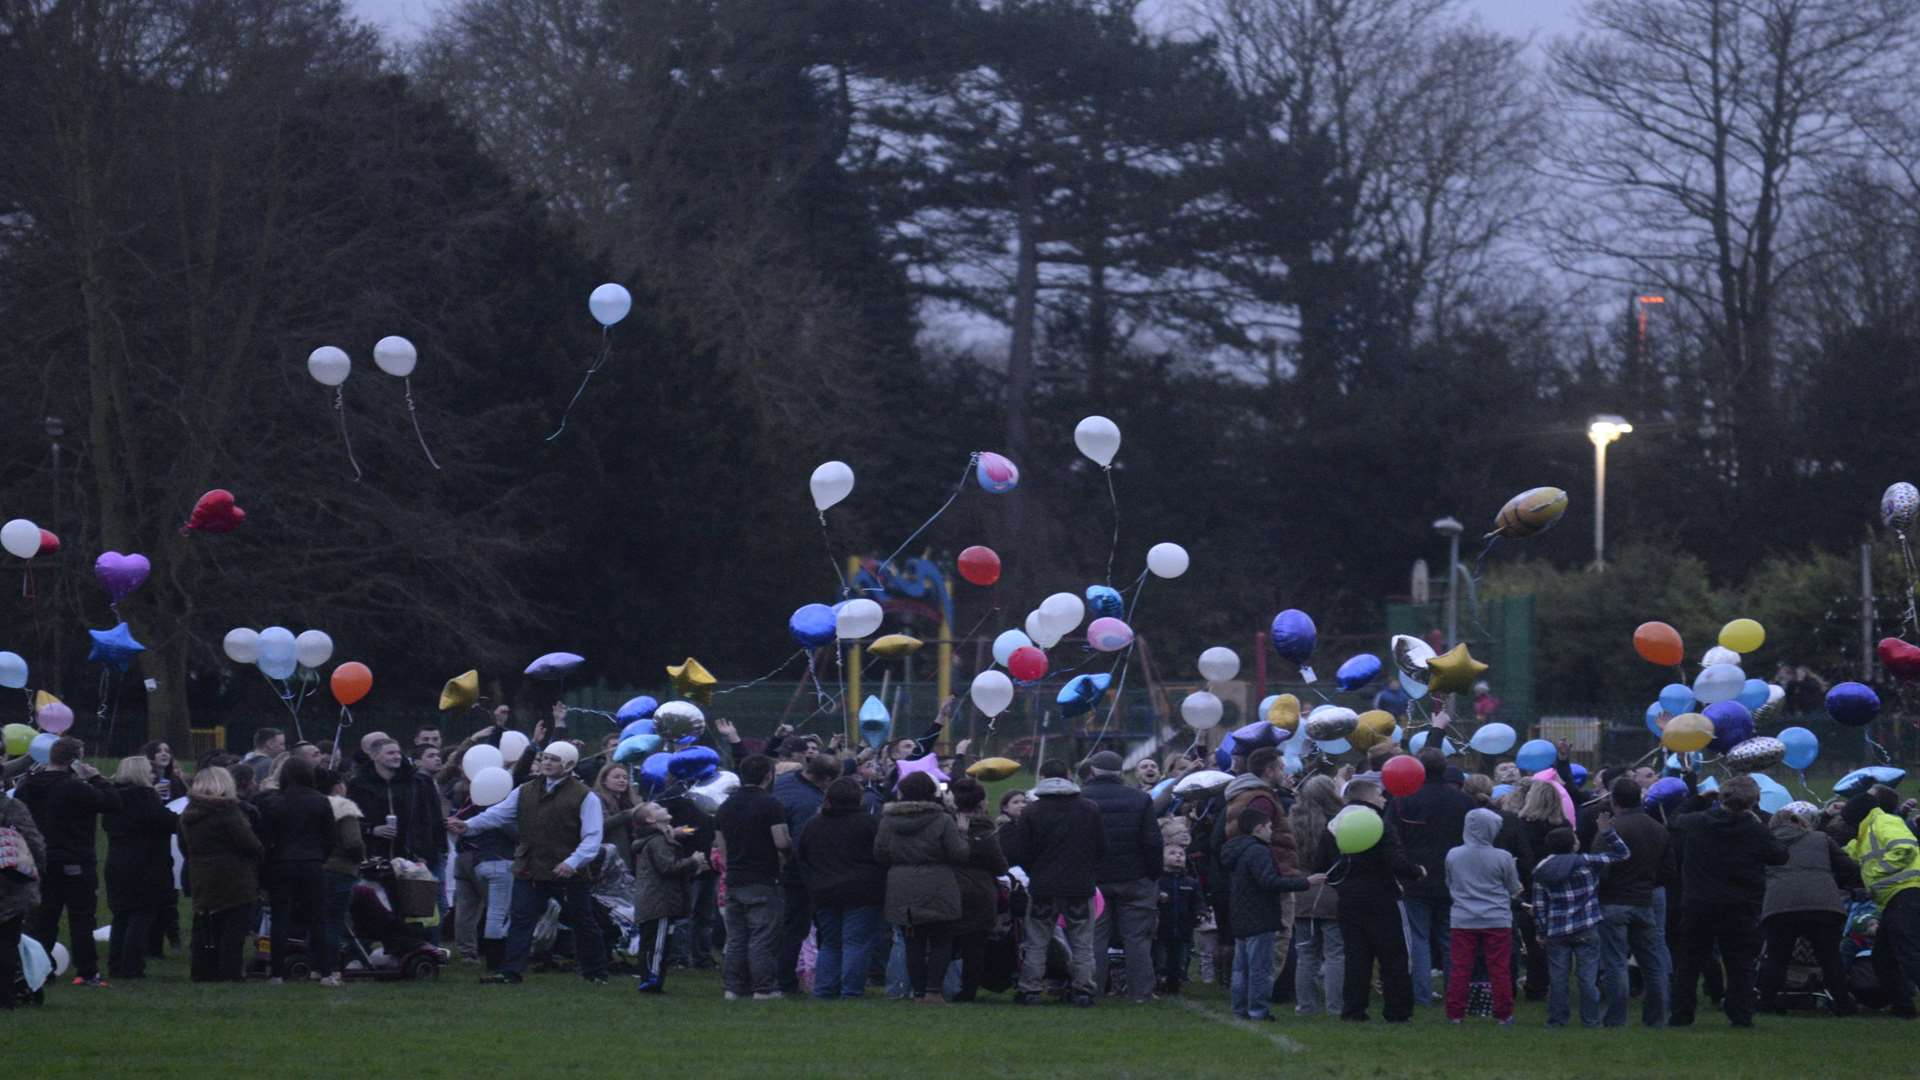 The scene at Faversham Recreation Ground on Saturday as balloons and lanterns are released in memory of Teynham car crash victim Michael Shepherd.